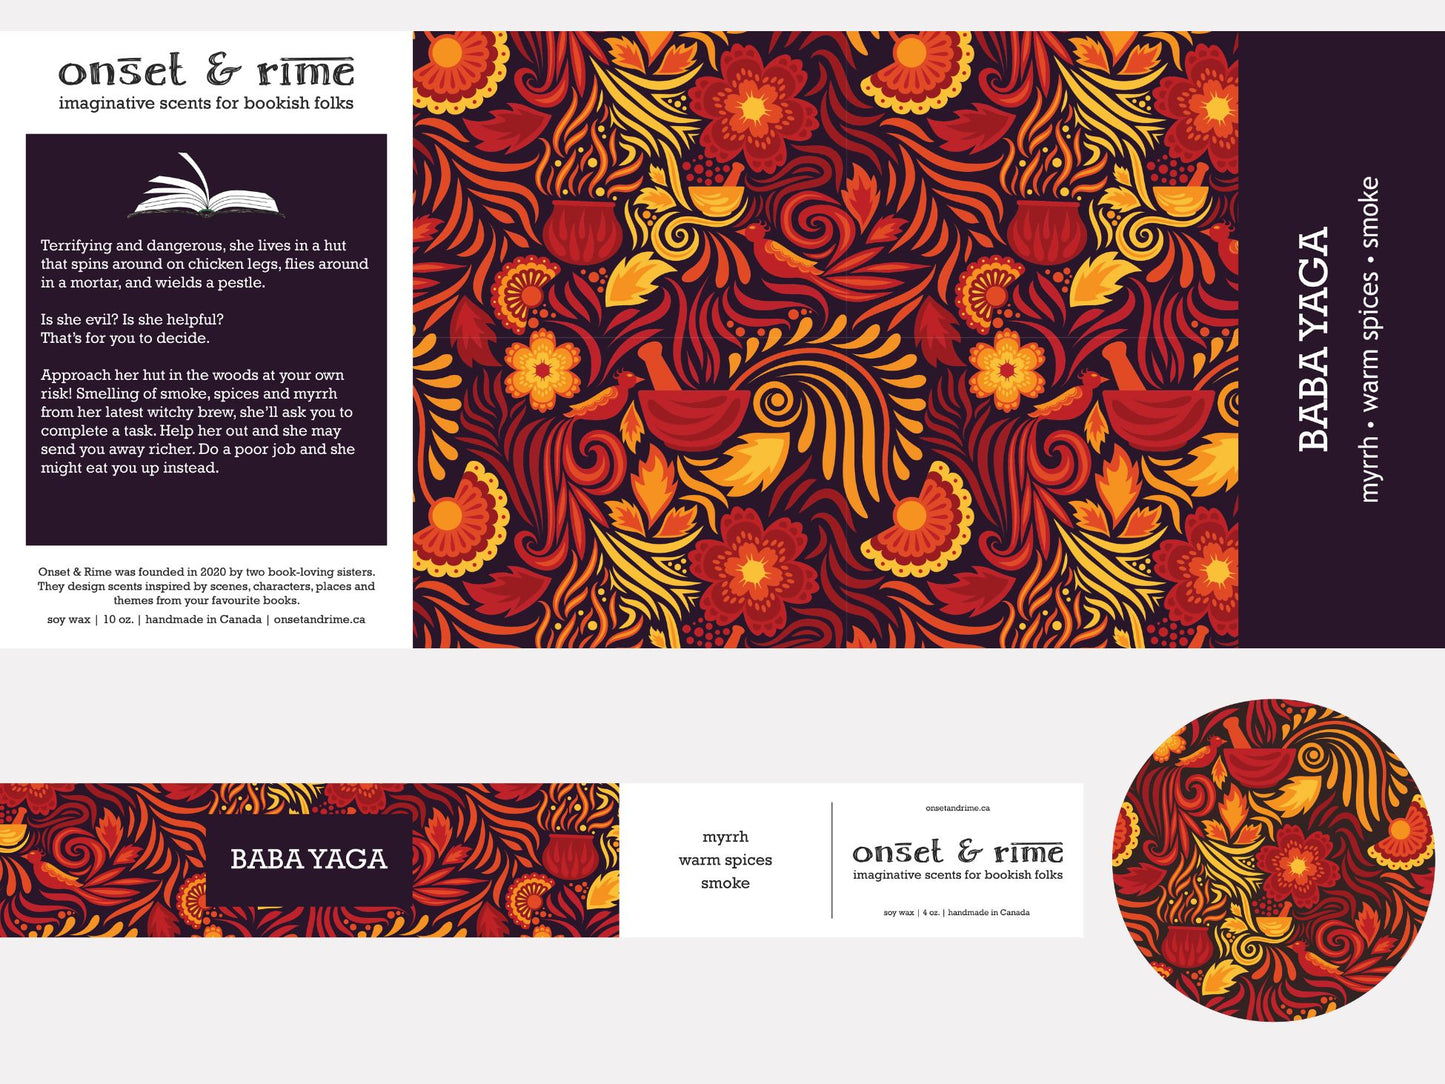 A close up view of the label for the Onset & Rime spiced smoke scented candle called "Baba Yaga". The label is purple-black with a bright red pattern of flames, swirls and flowers. The text on the label is "Baba Yaga - Myrrh, Warm Spices, Smoke".